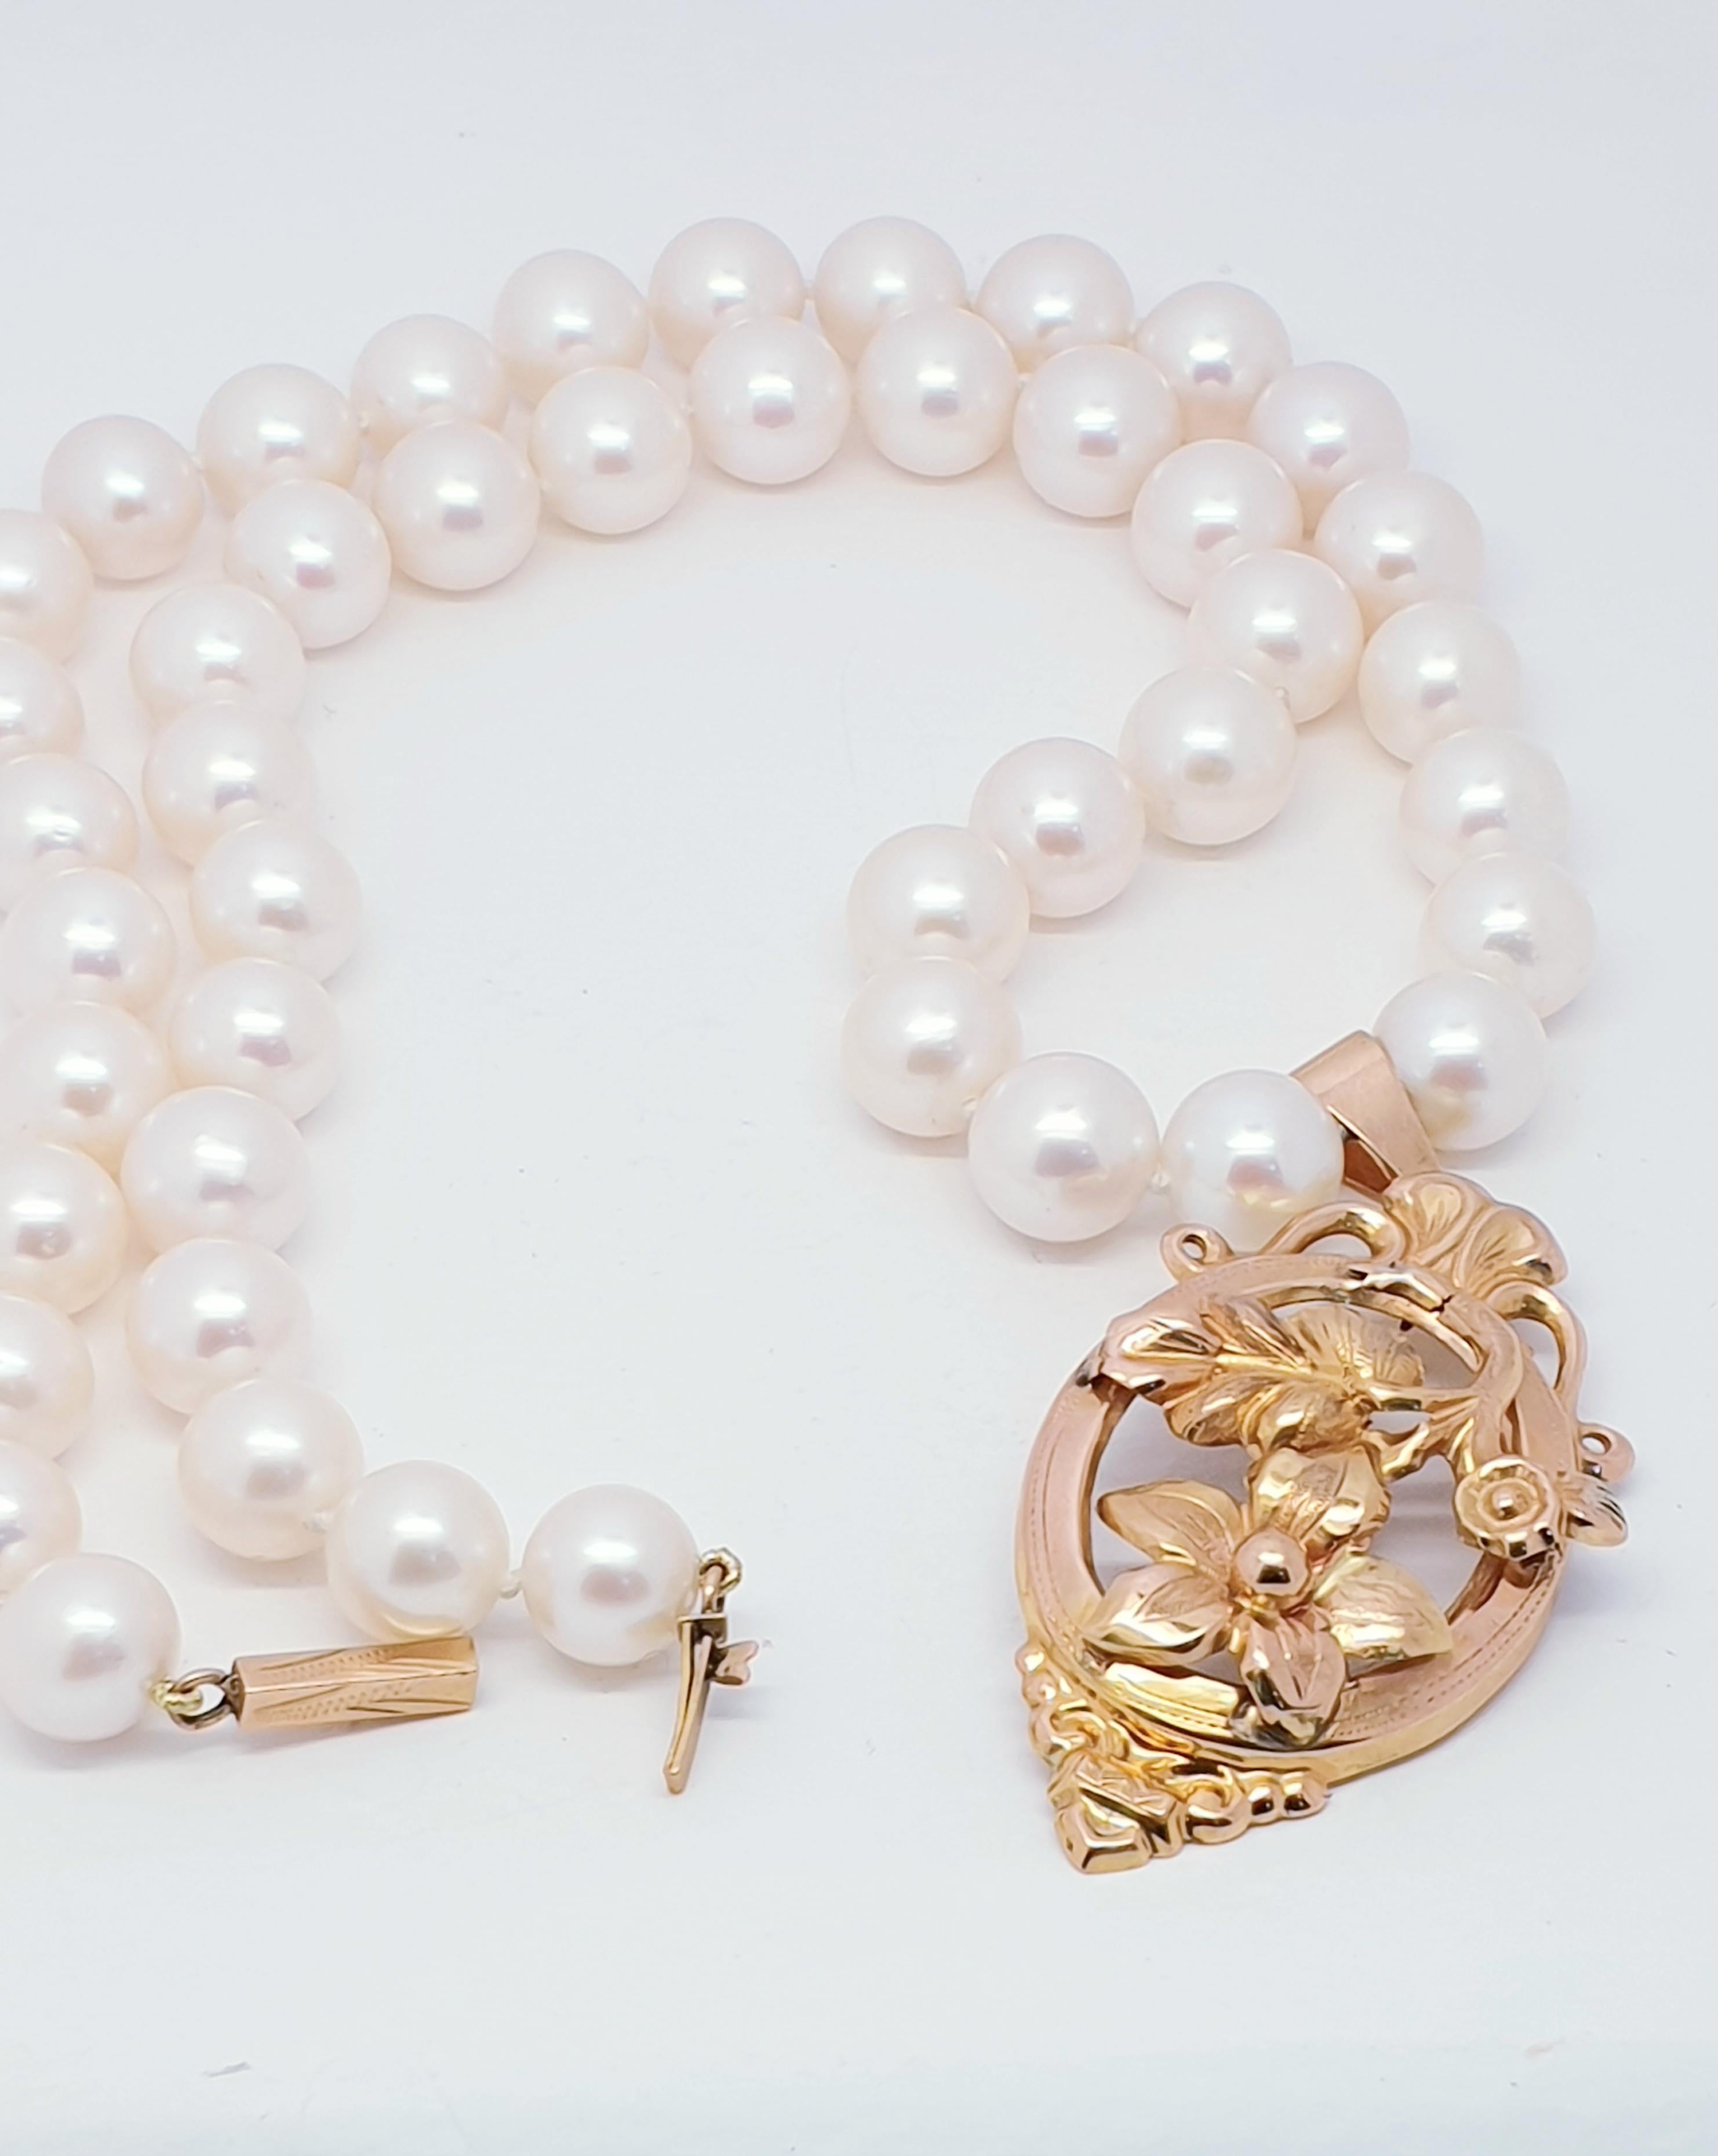 Antique Cultured Pearl Necklace 18 Karat Gold Clasp In Good Condition For Sale In Dublin, IE